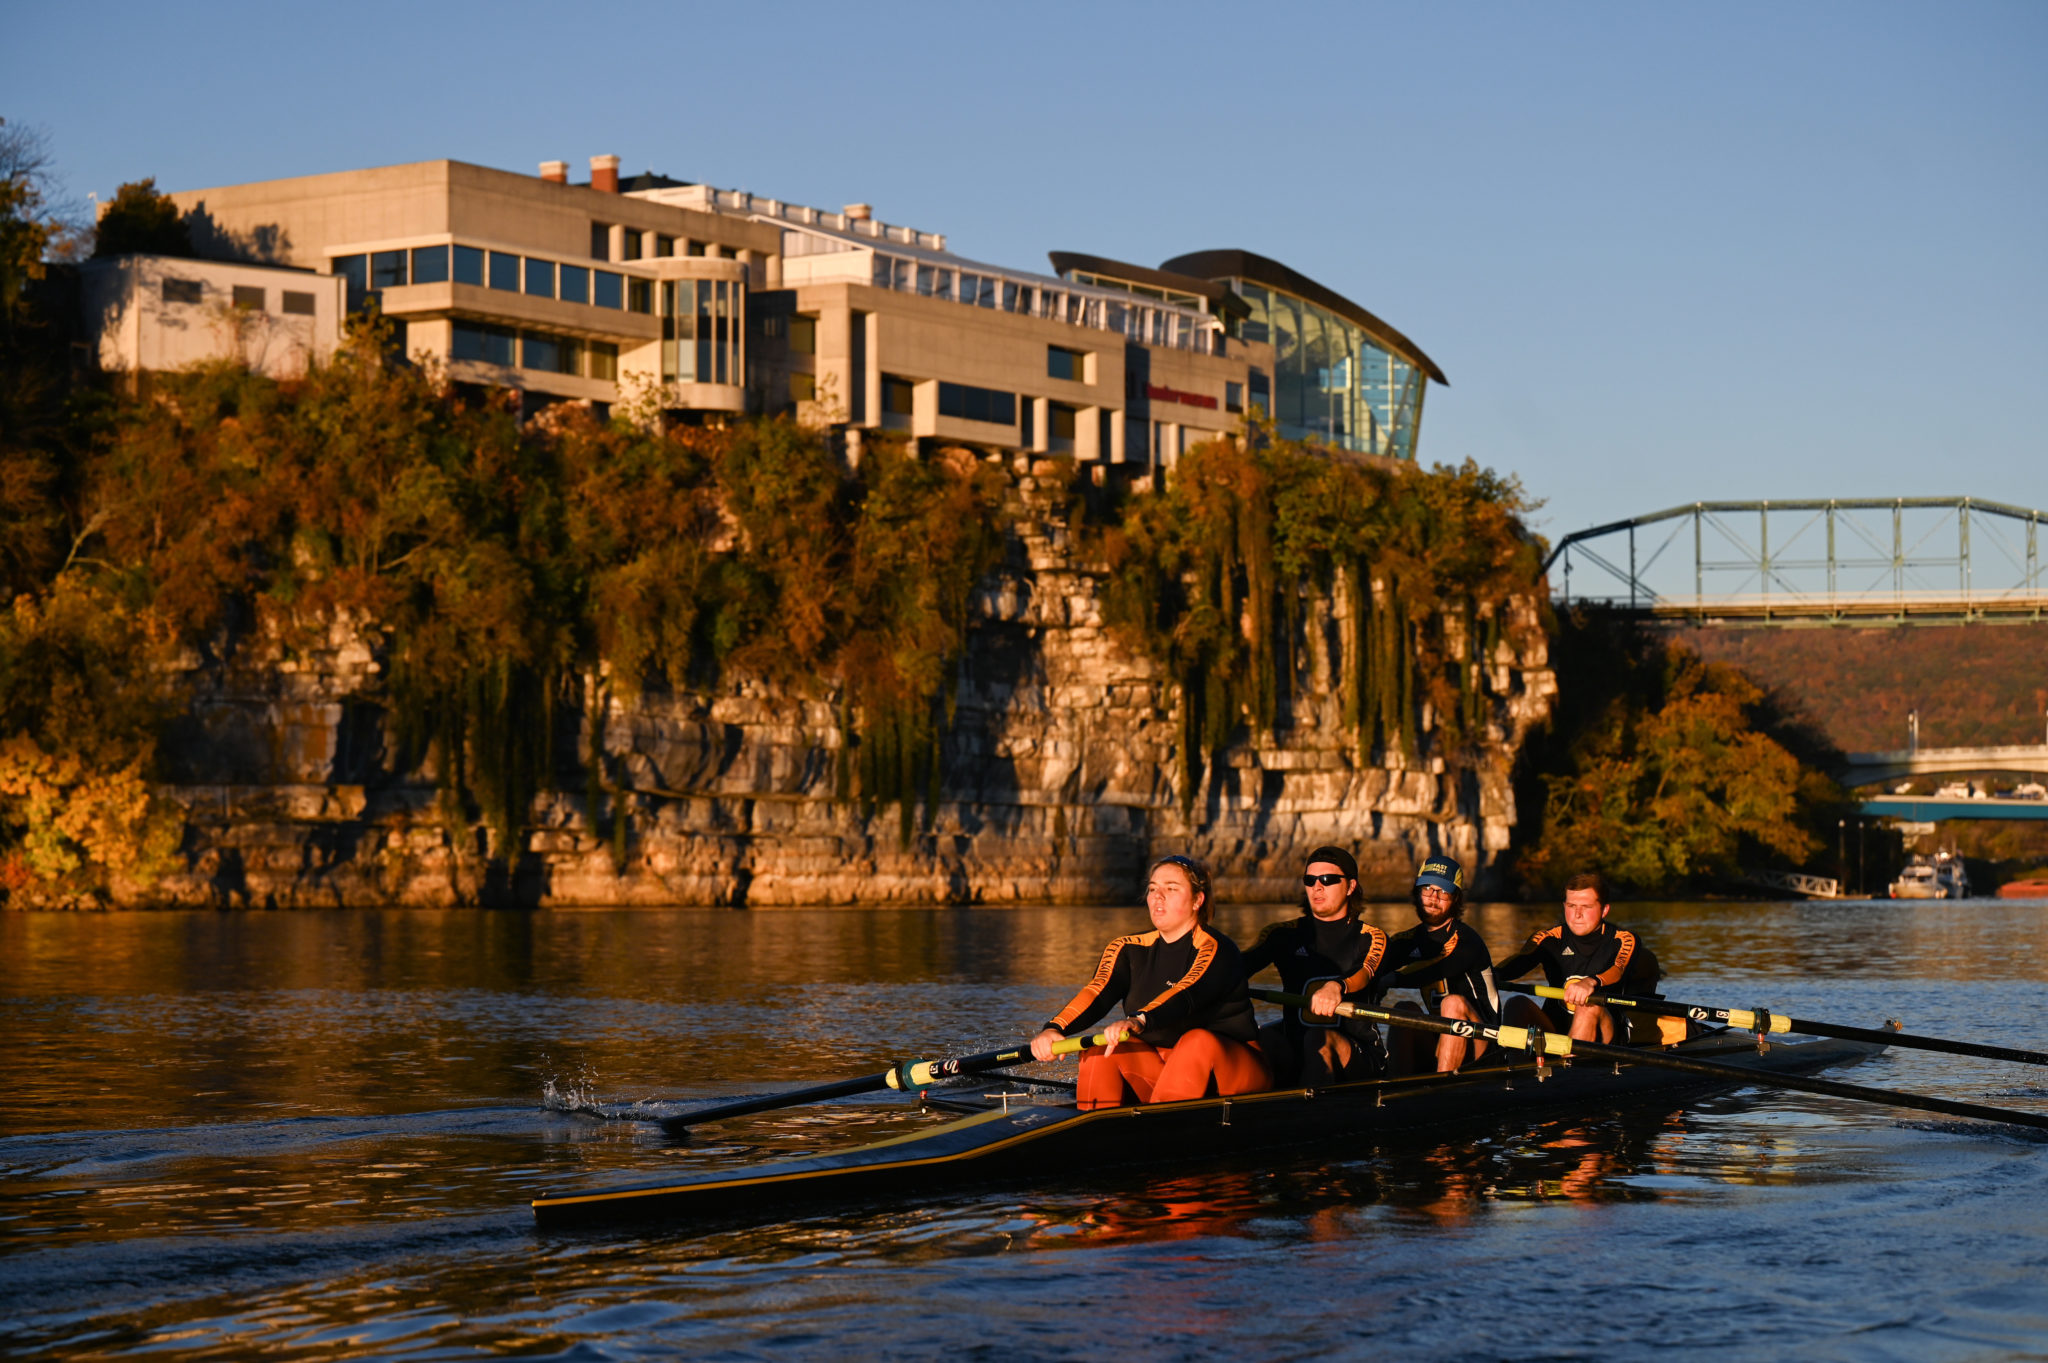 UTC rowers skim across the Tennessee River. From left, Karoline Bonastia, Nathaniel Haley, Steven Sanford and Ethan Hitchcock. Photo By Angela Foster University of Tennessee at Chattanooga